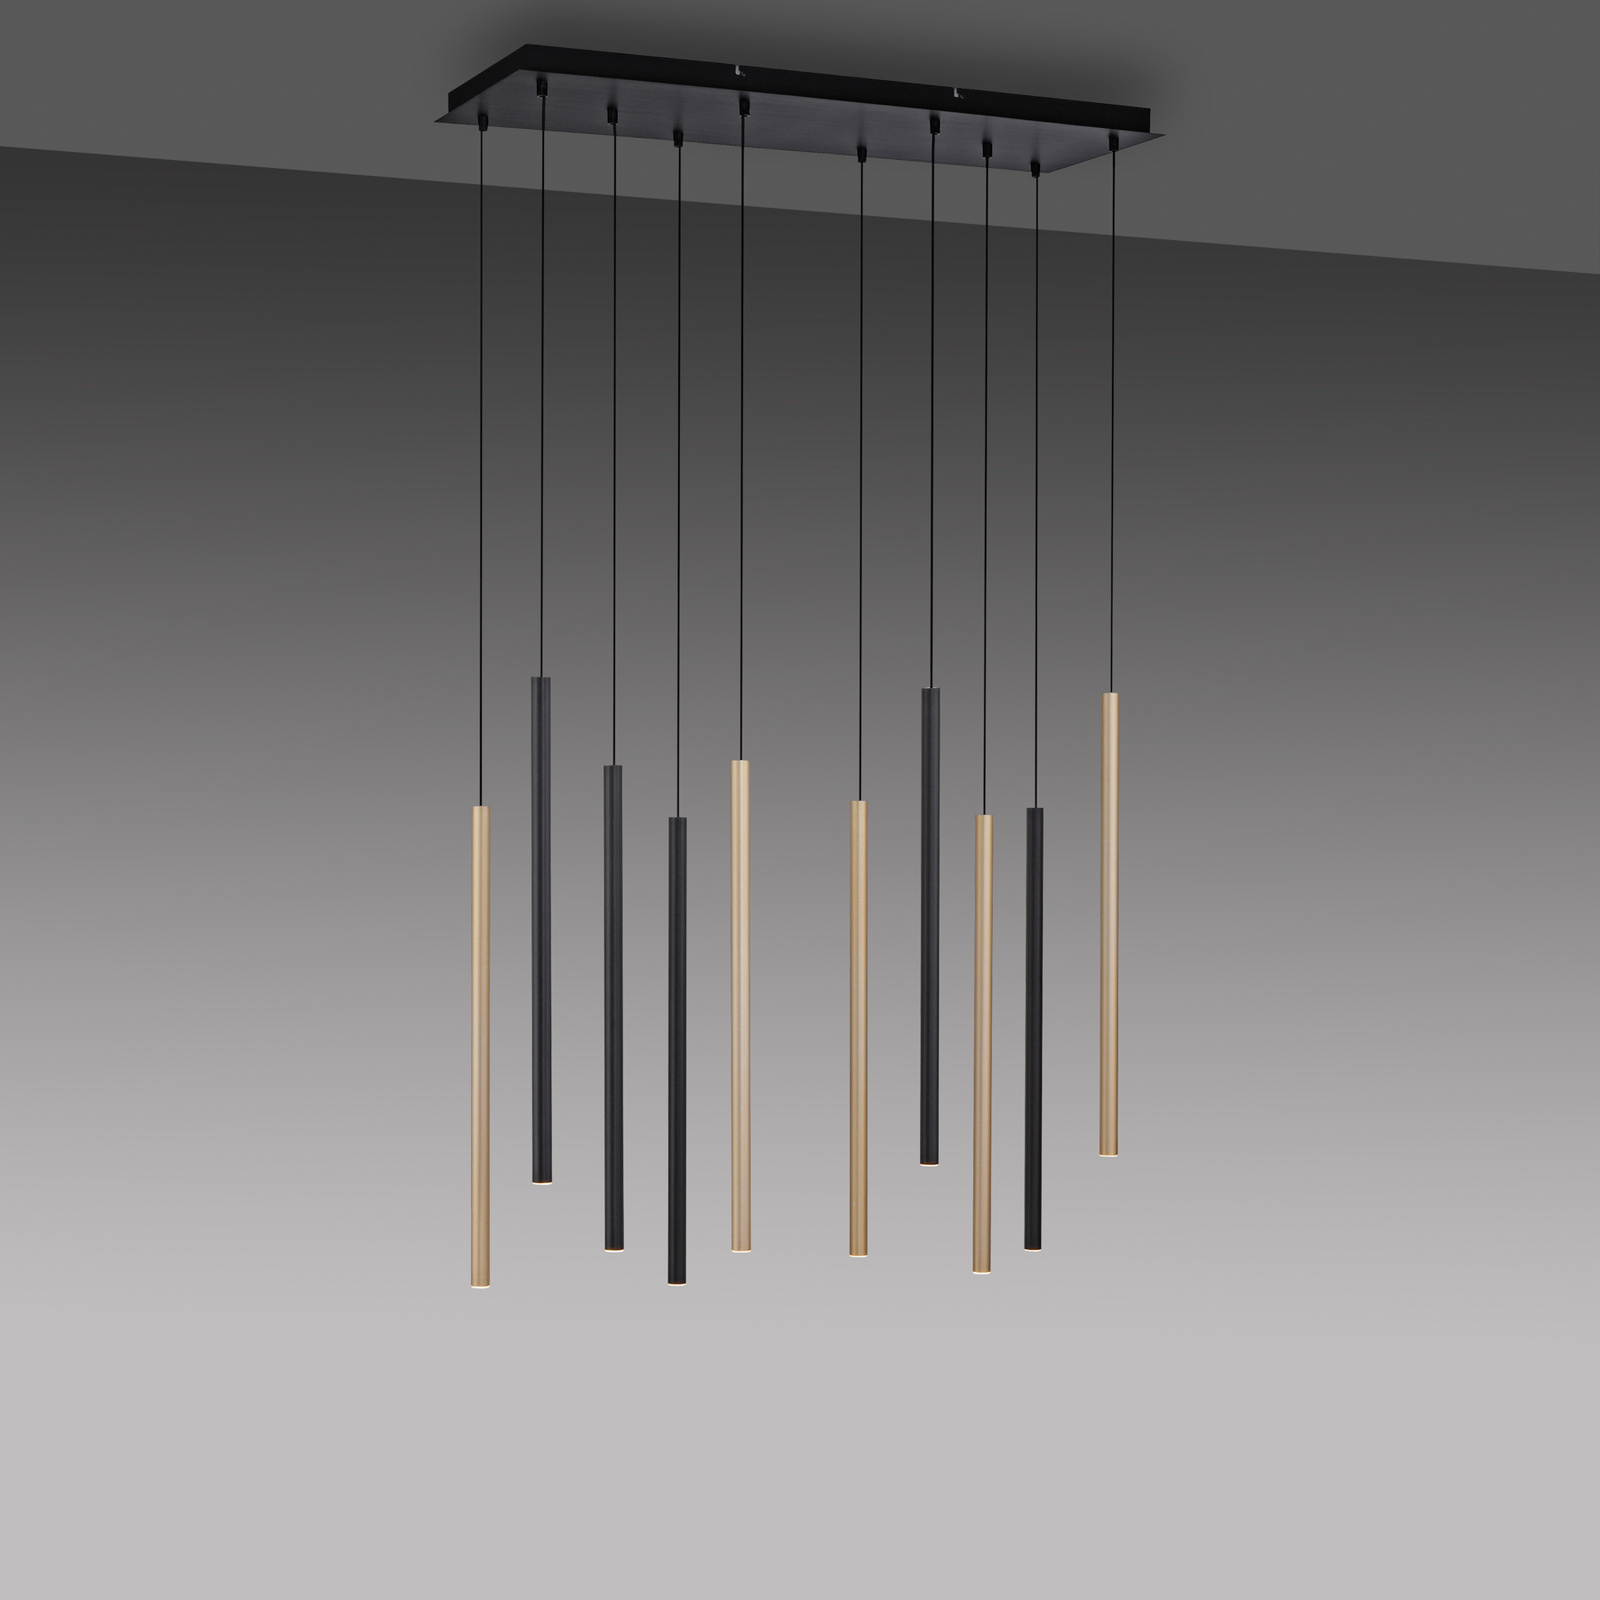 Suspension LED inondation, dimmable, à 10 lampes